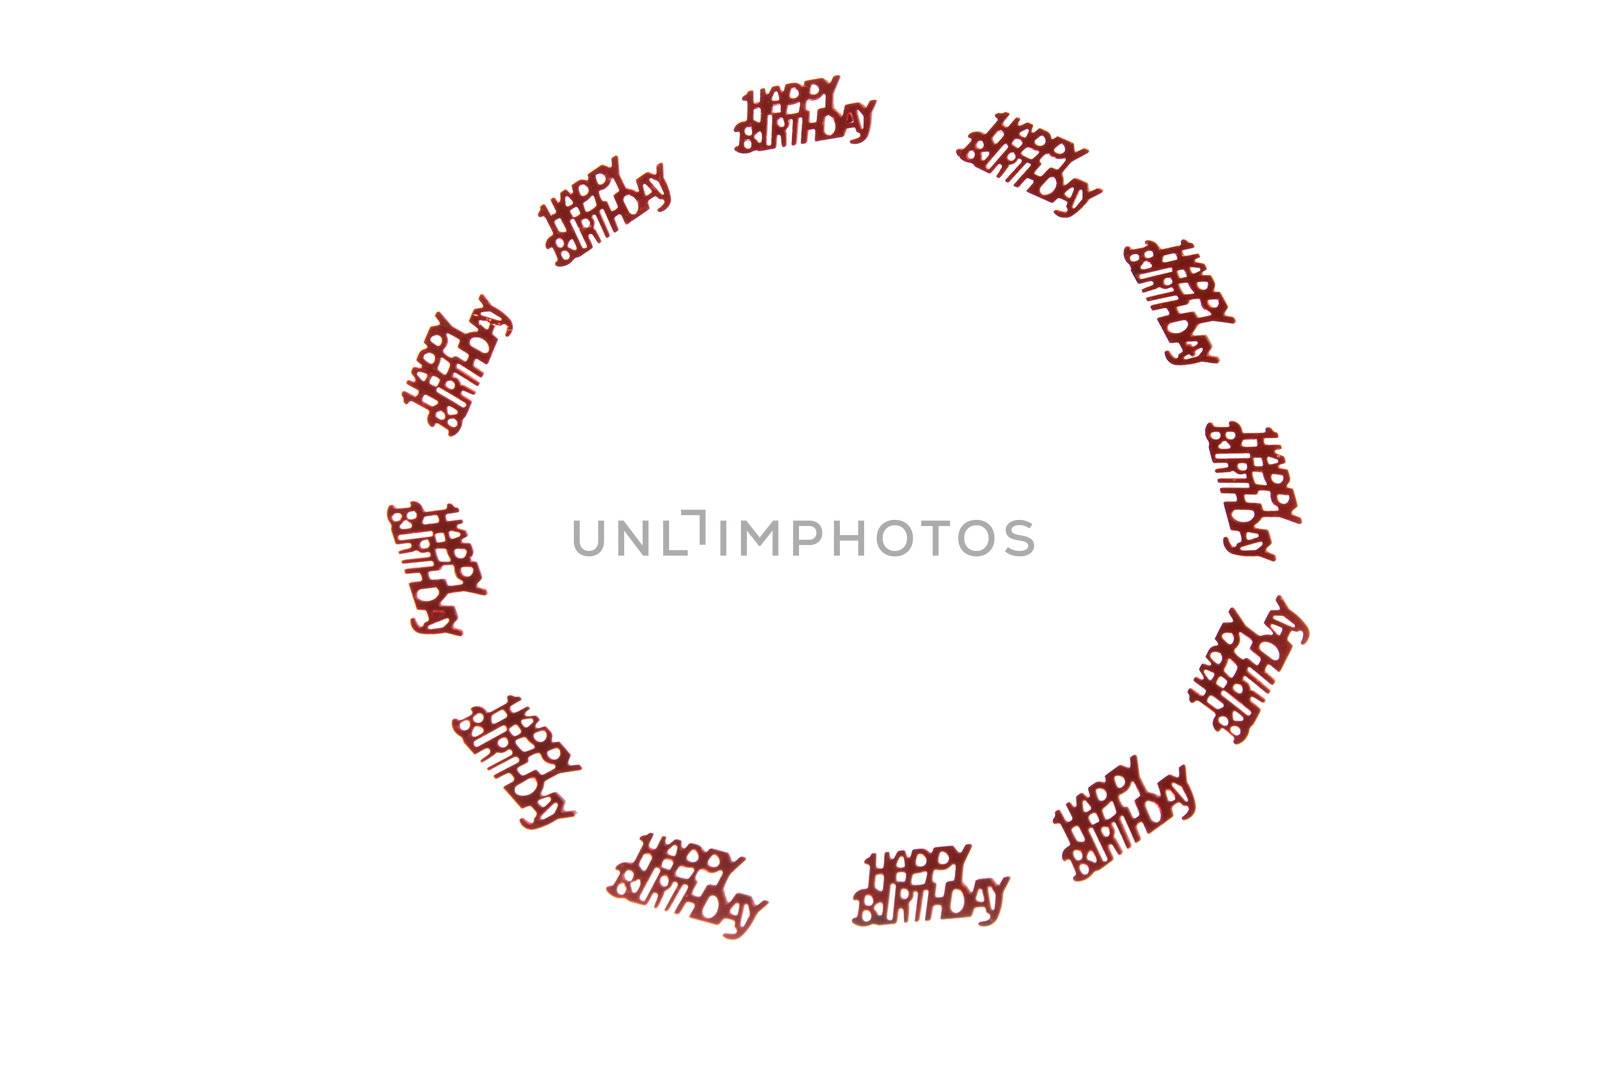 small lettering with happy birthday in a circle lying on a white background